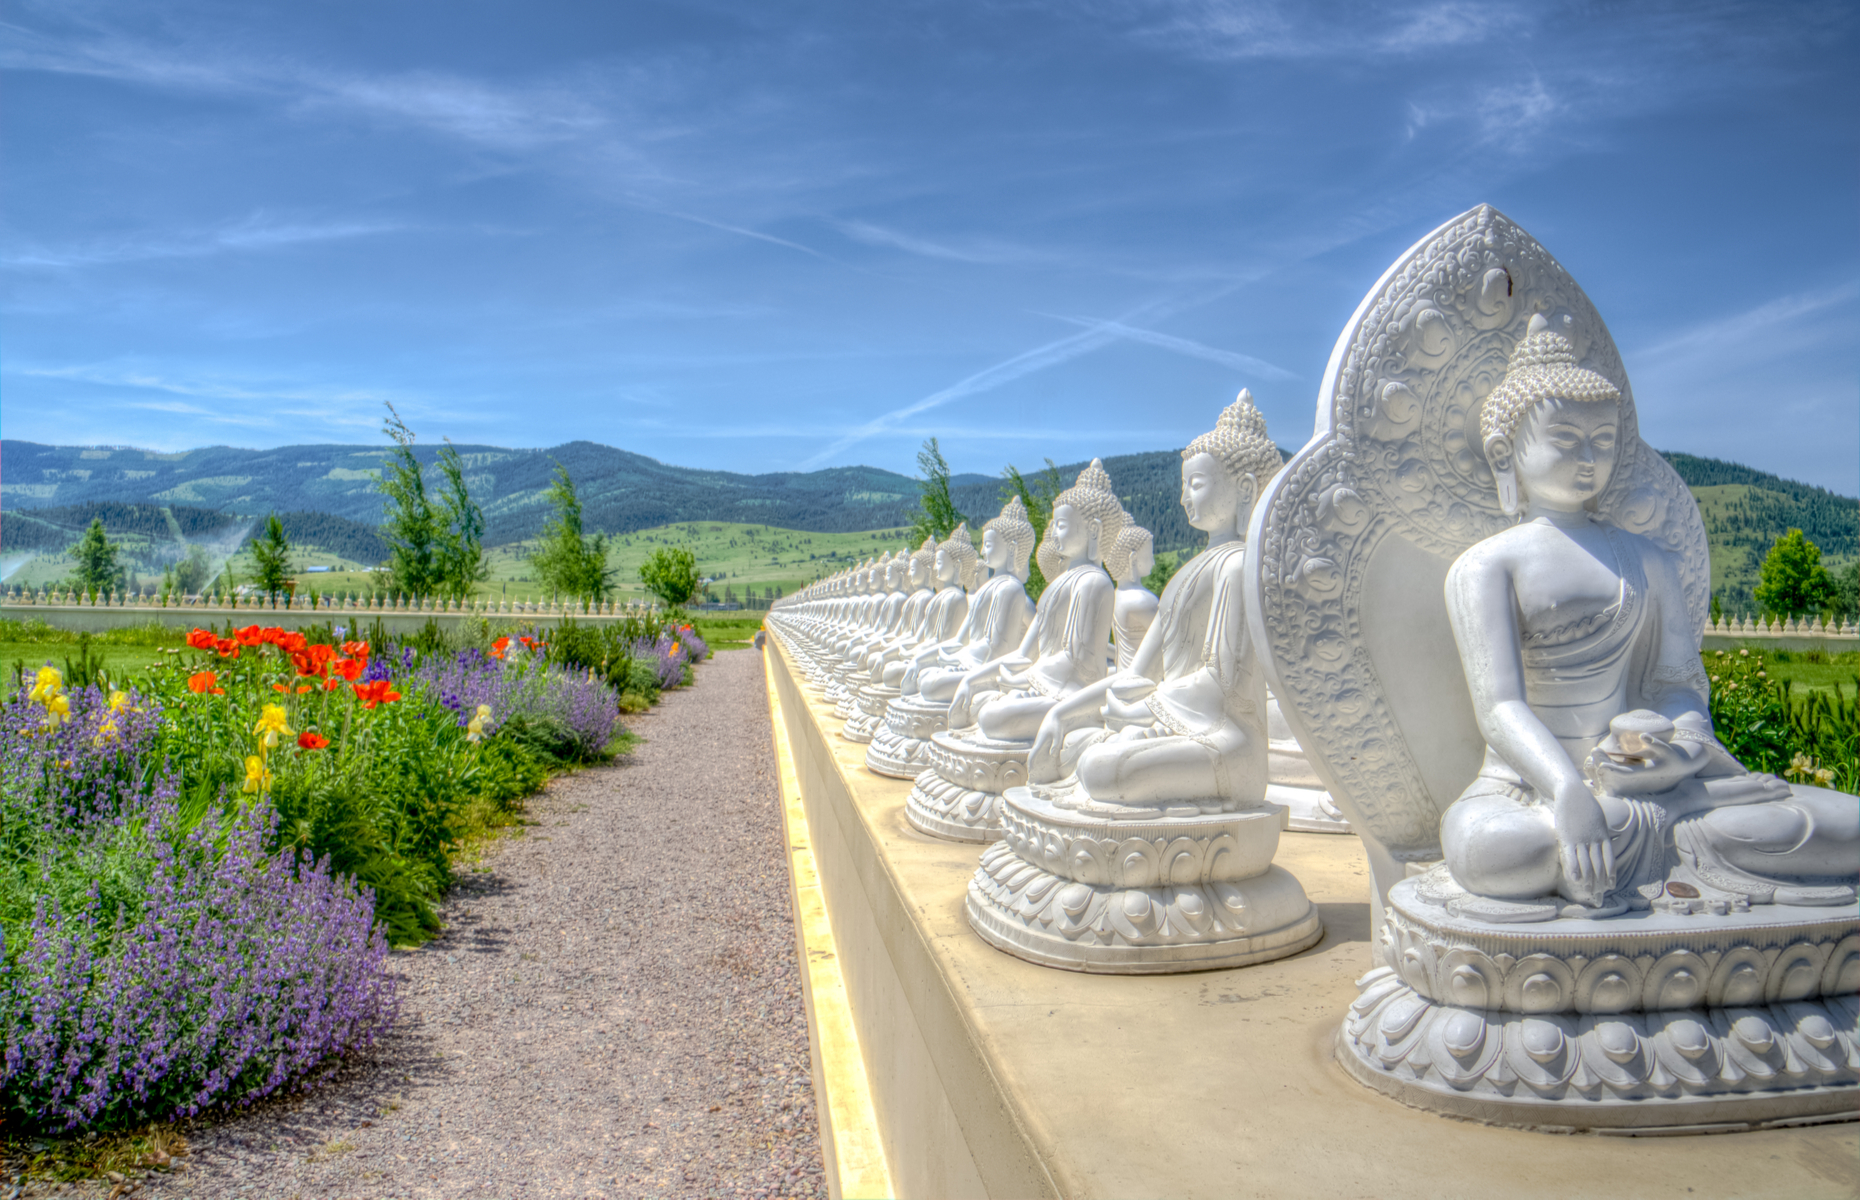 <p class="p1"><span>Montana isn’t the first place you would expect to find a garden full of Buddha statues, but when you consider that most people head to “The Last Best Place” to get away from it all and achieve a bit of Zen, then it makes perfect sense. Created in 2000, <a href="https://www.ewambuddhagarden.org/about/" rel="noreferrer noopener"><span>the garden</span></a>, which is spread across 10 acres, is intended as “a sacred place to uncover one’s fundamental dignity, intelligence and wakefulness.”</span></p>